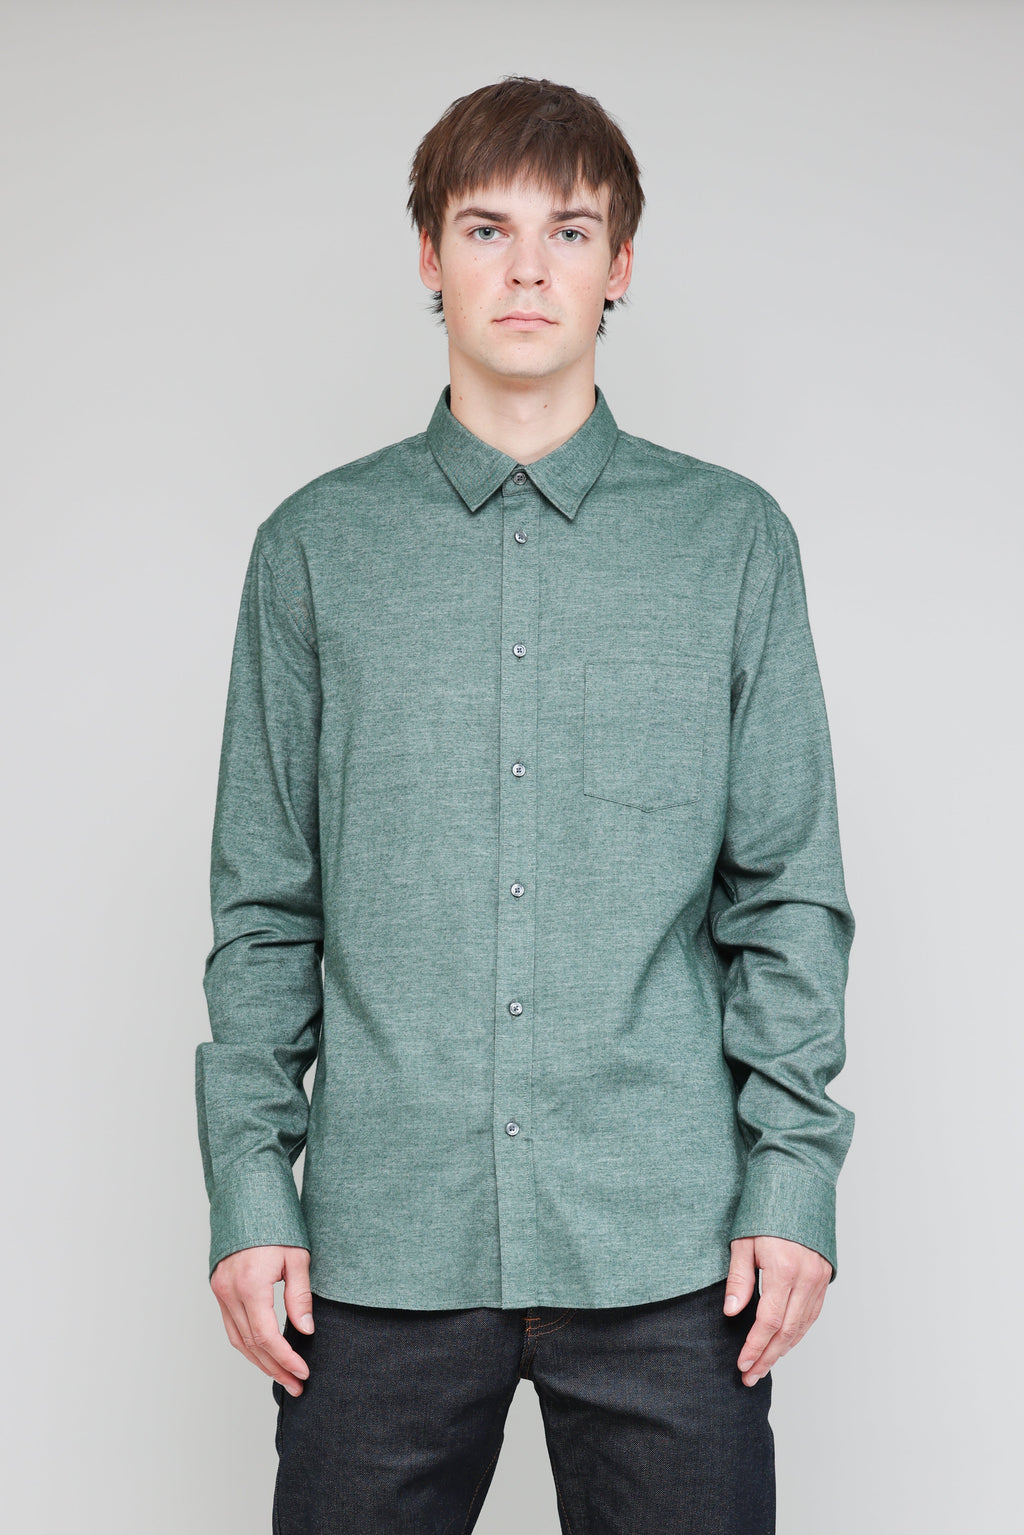 Japanese Brushed Twill in Green 01